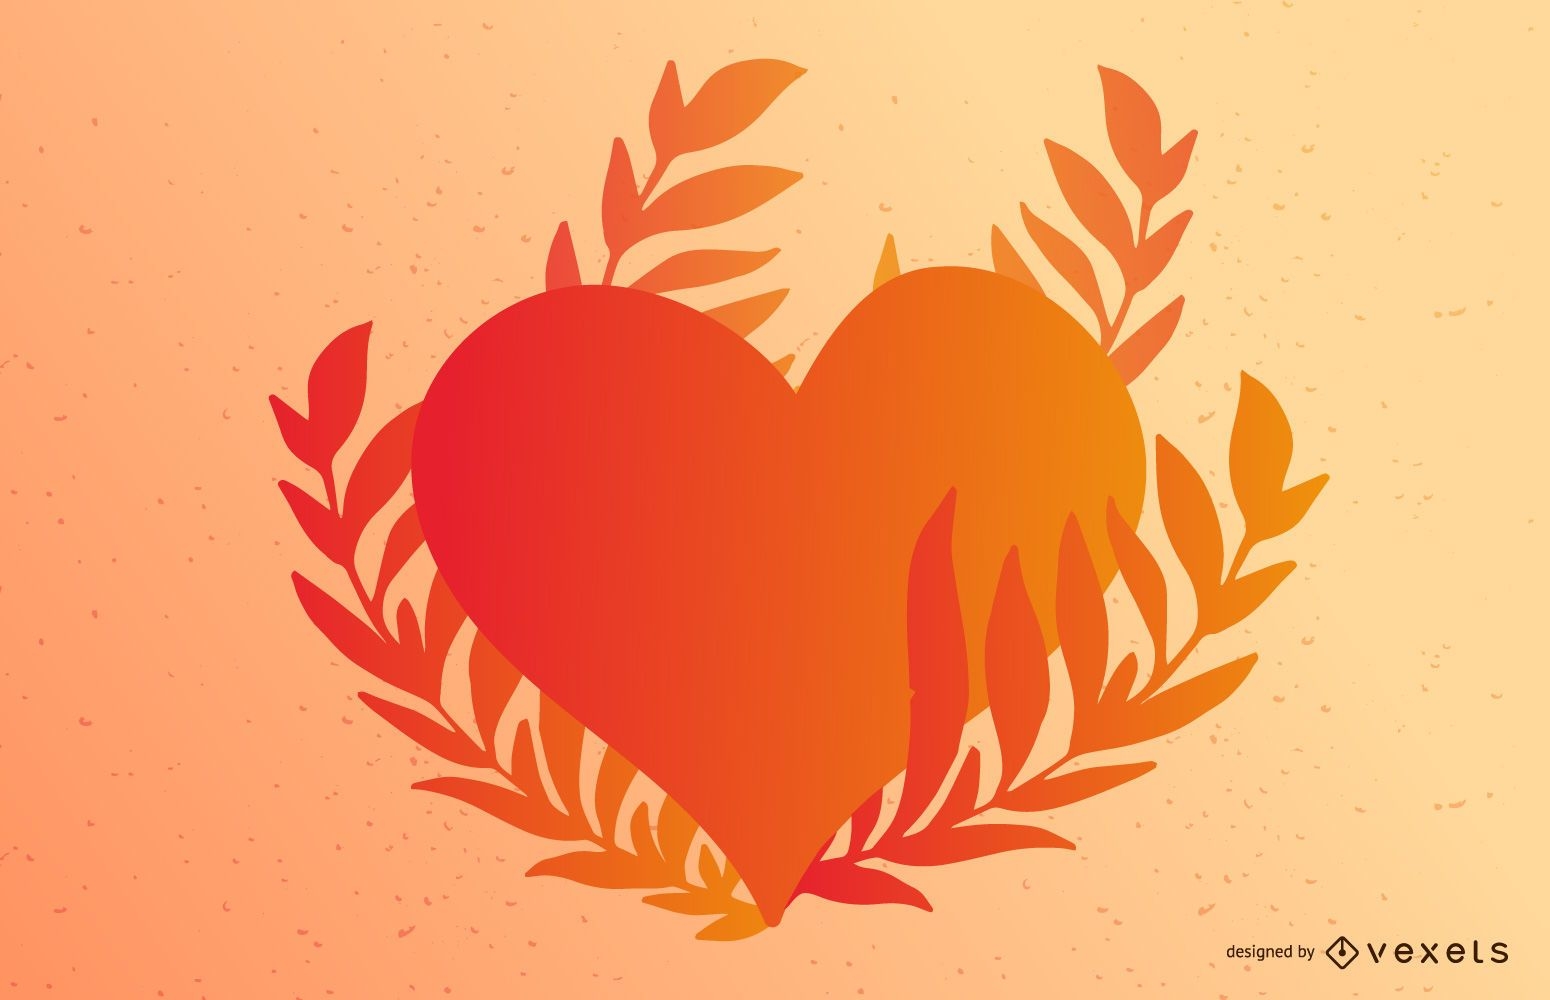 Heart and leaves illustration